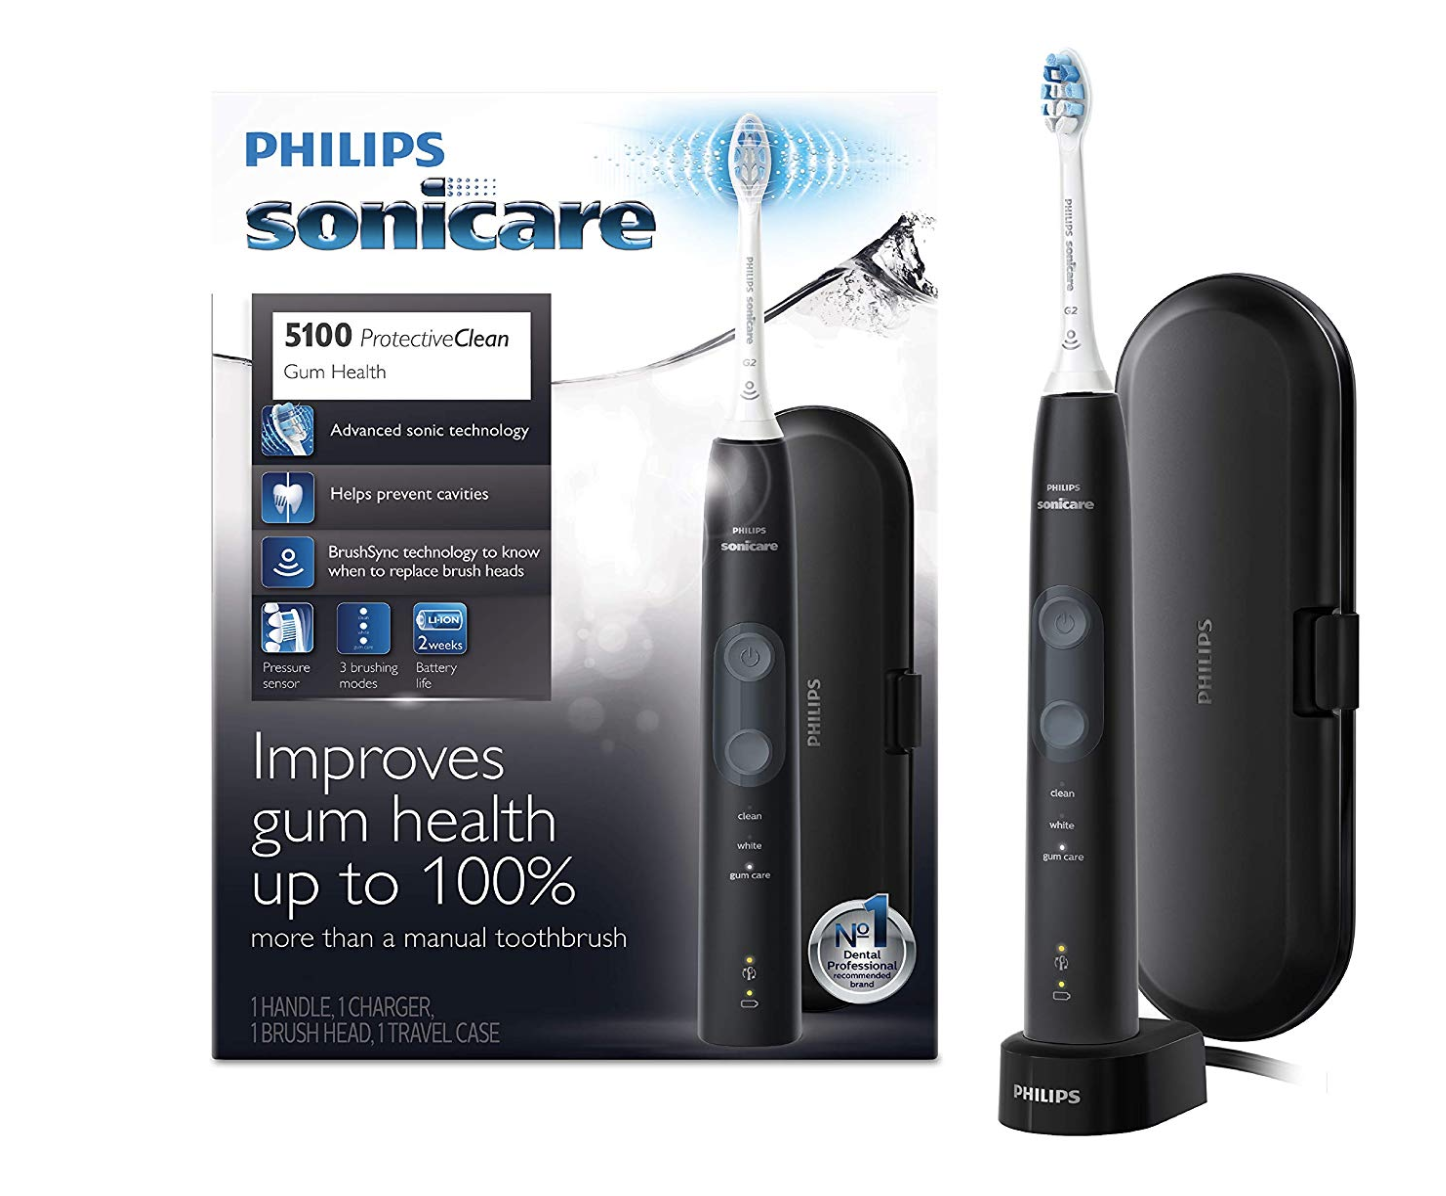 Philips Sonicare ProtectiveClean 5100 Electric Rechargeable Toothbrush